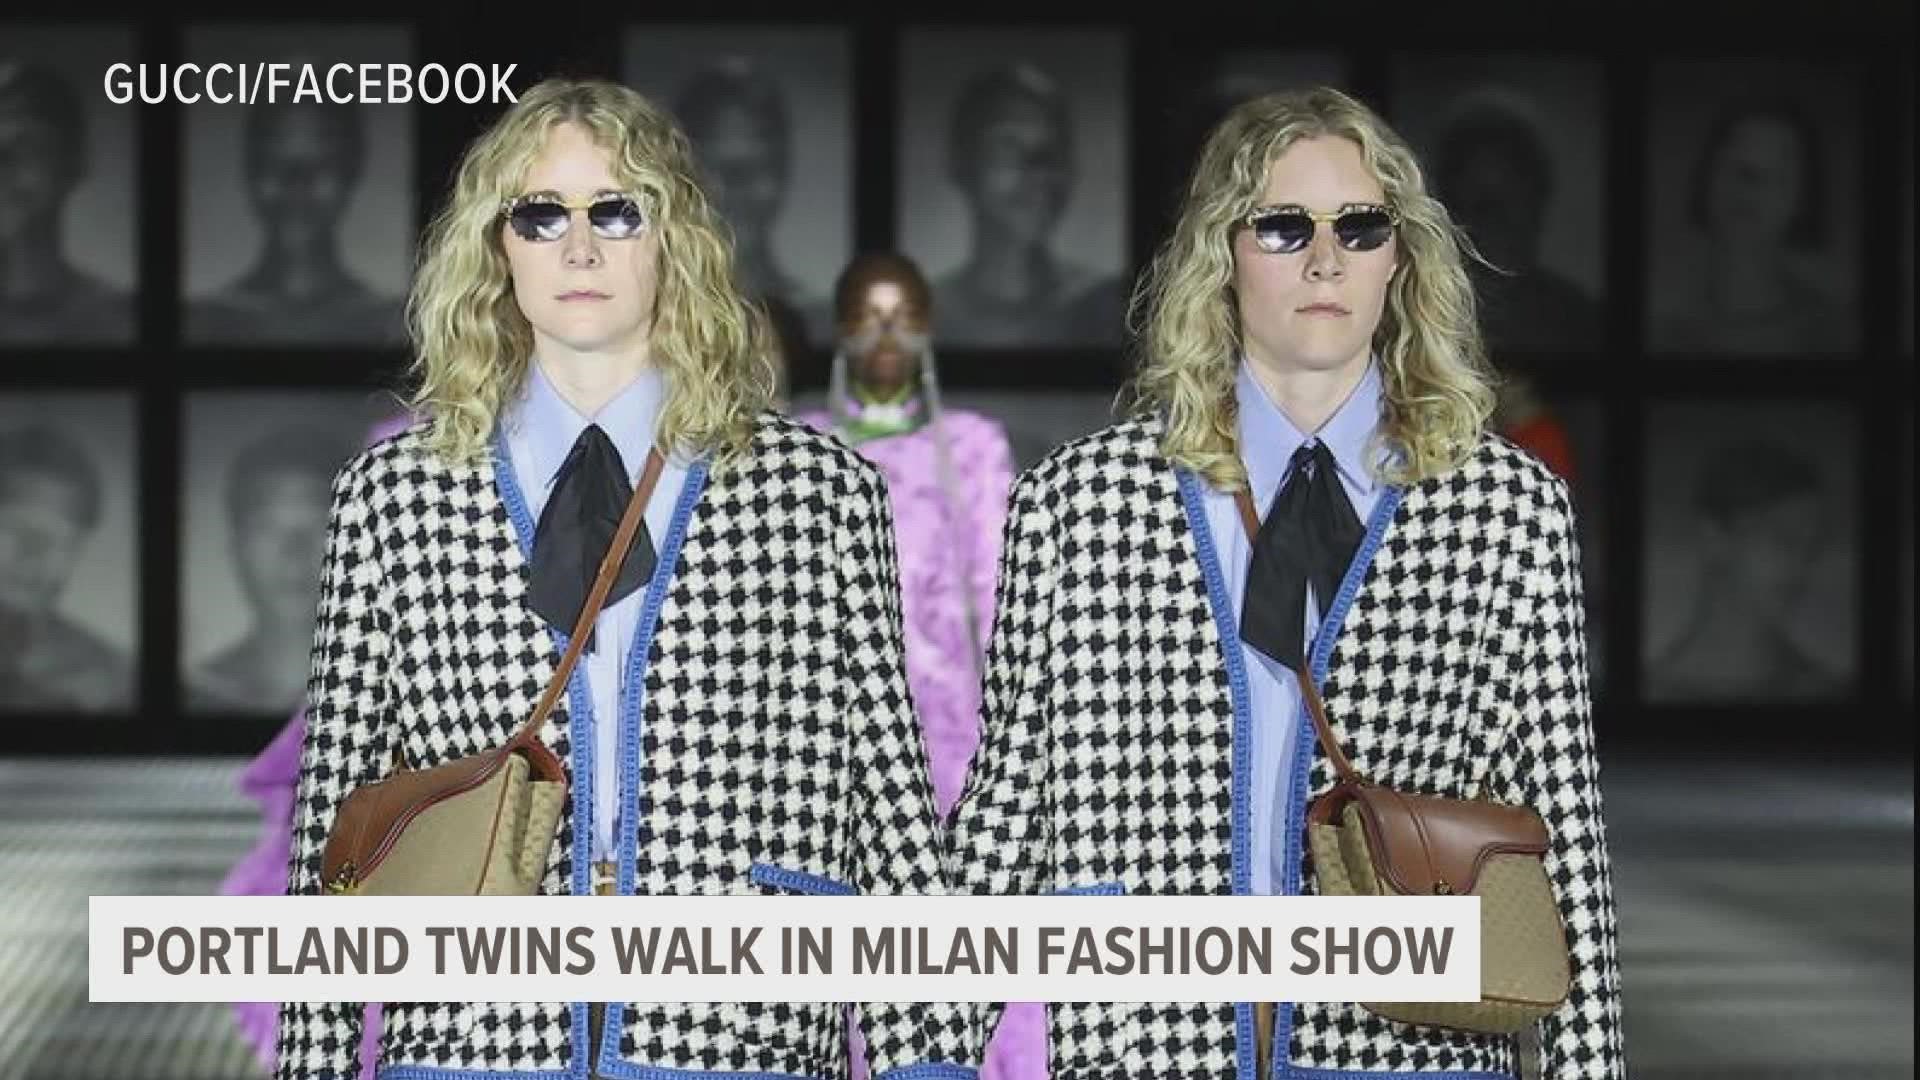 Gucci's creative director Alessandro Michele created the show for his Spring-Summer collection called "Twinsburg."